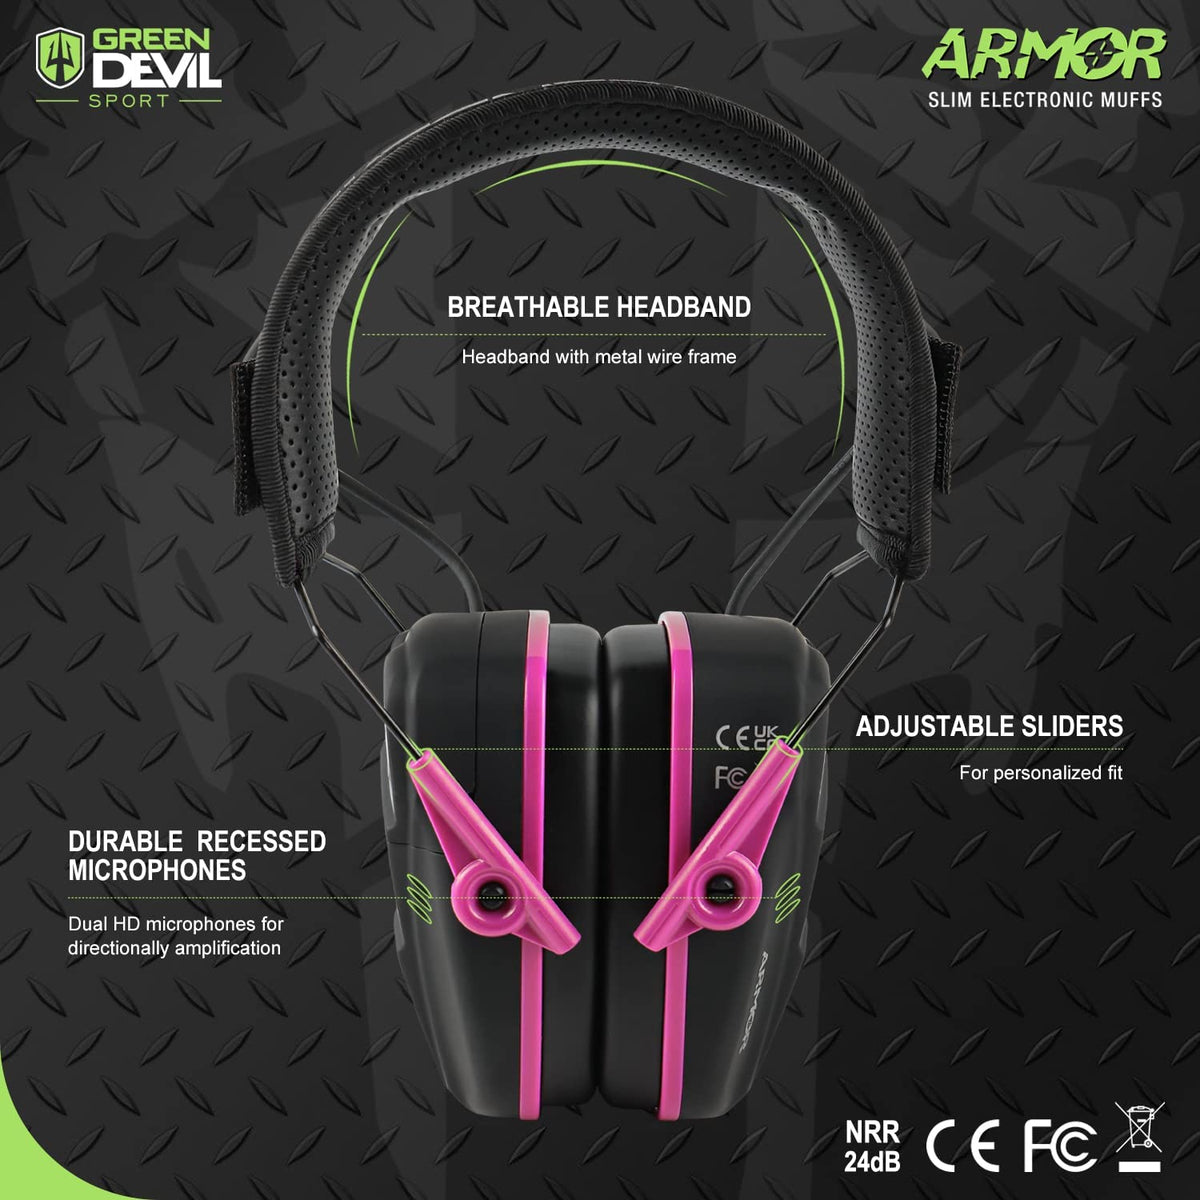 GREEN DEVIL Shooting Ear Protection Electronic Noise Reduction Hearing Protection Earmuffs Headphones For Gun Range Hunting Pink and Black